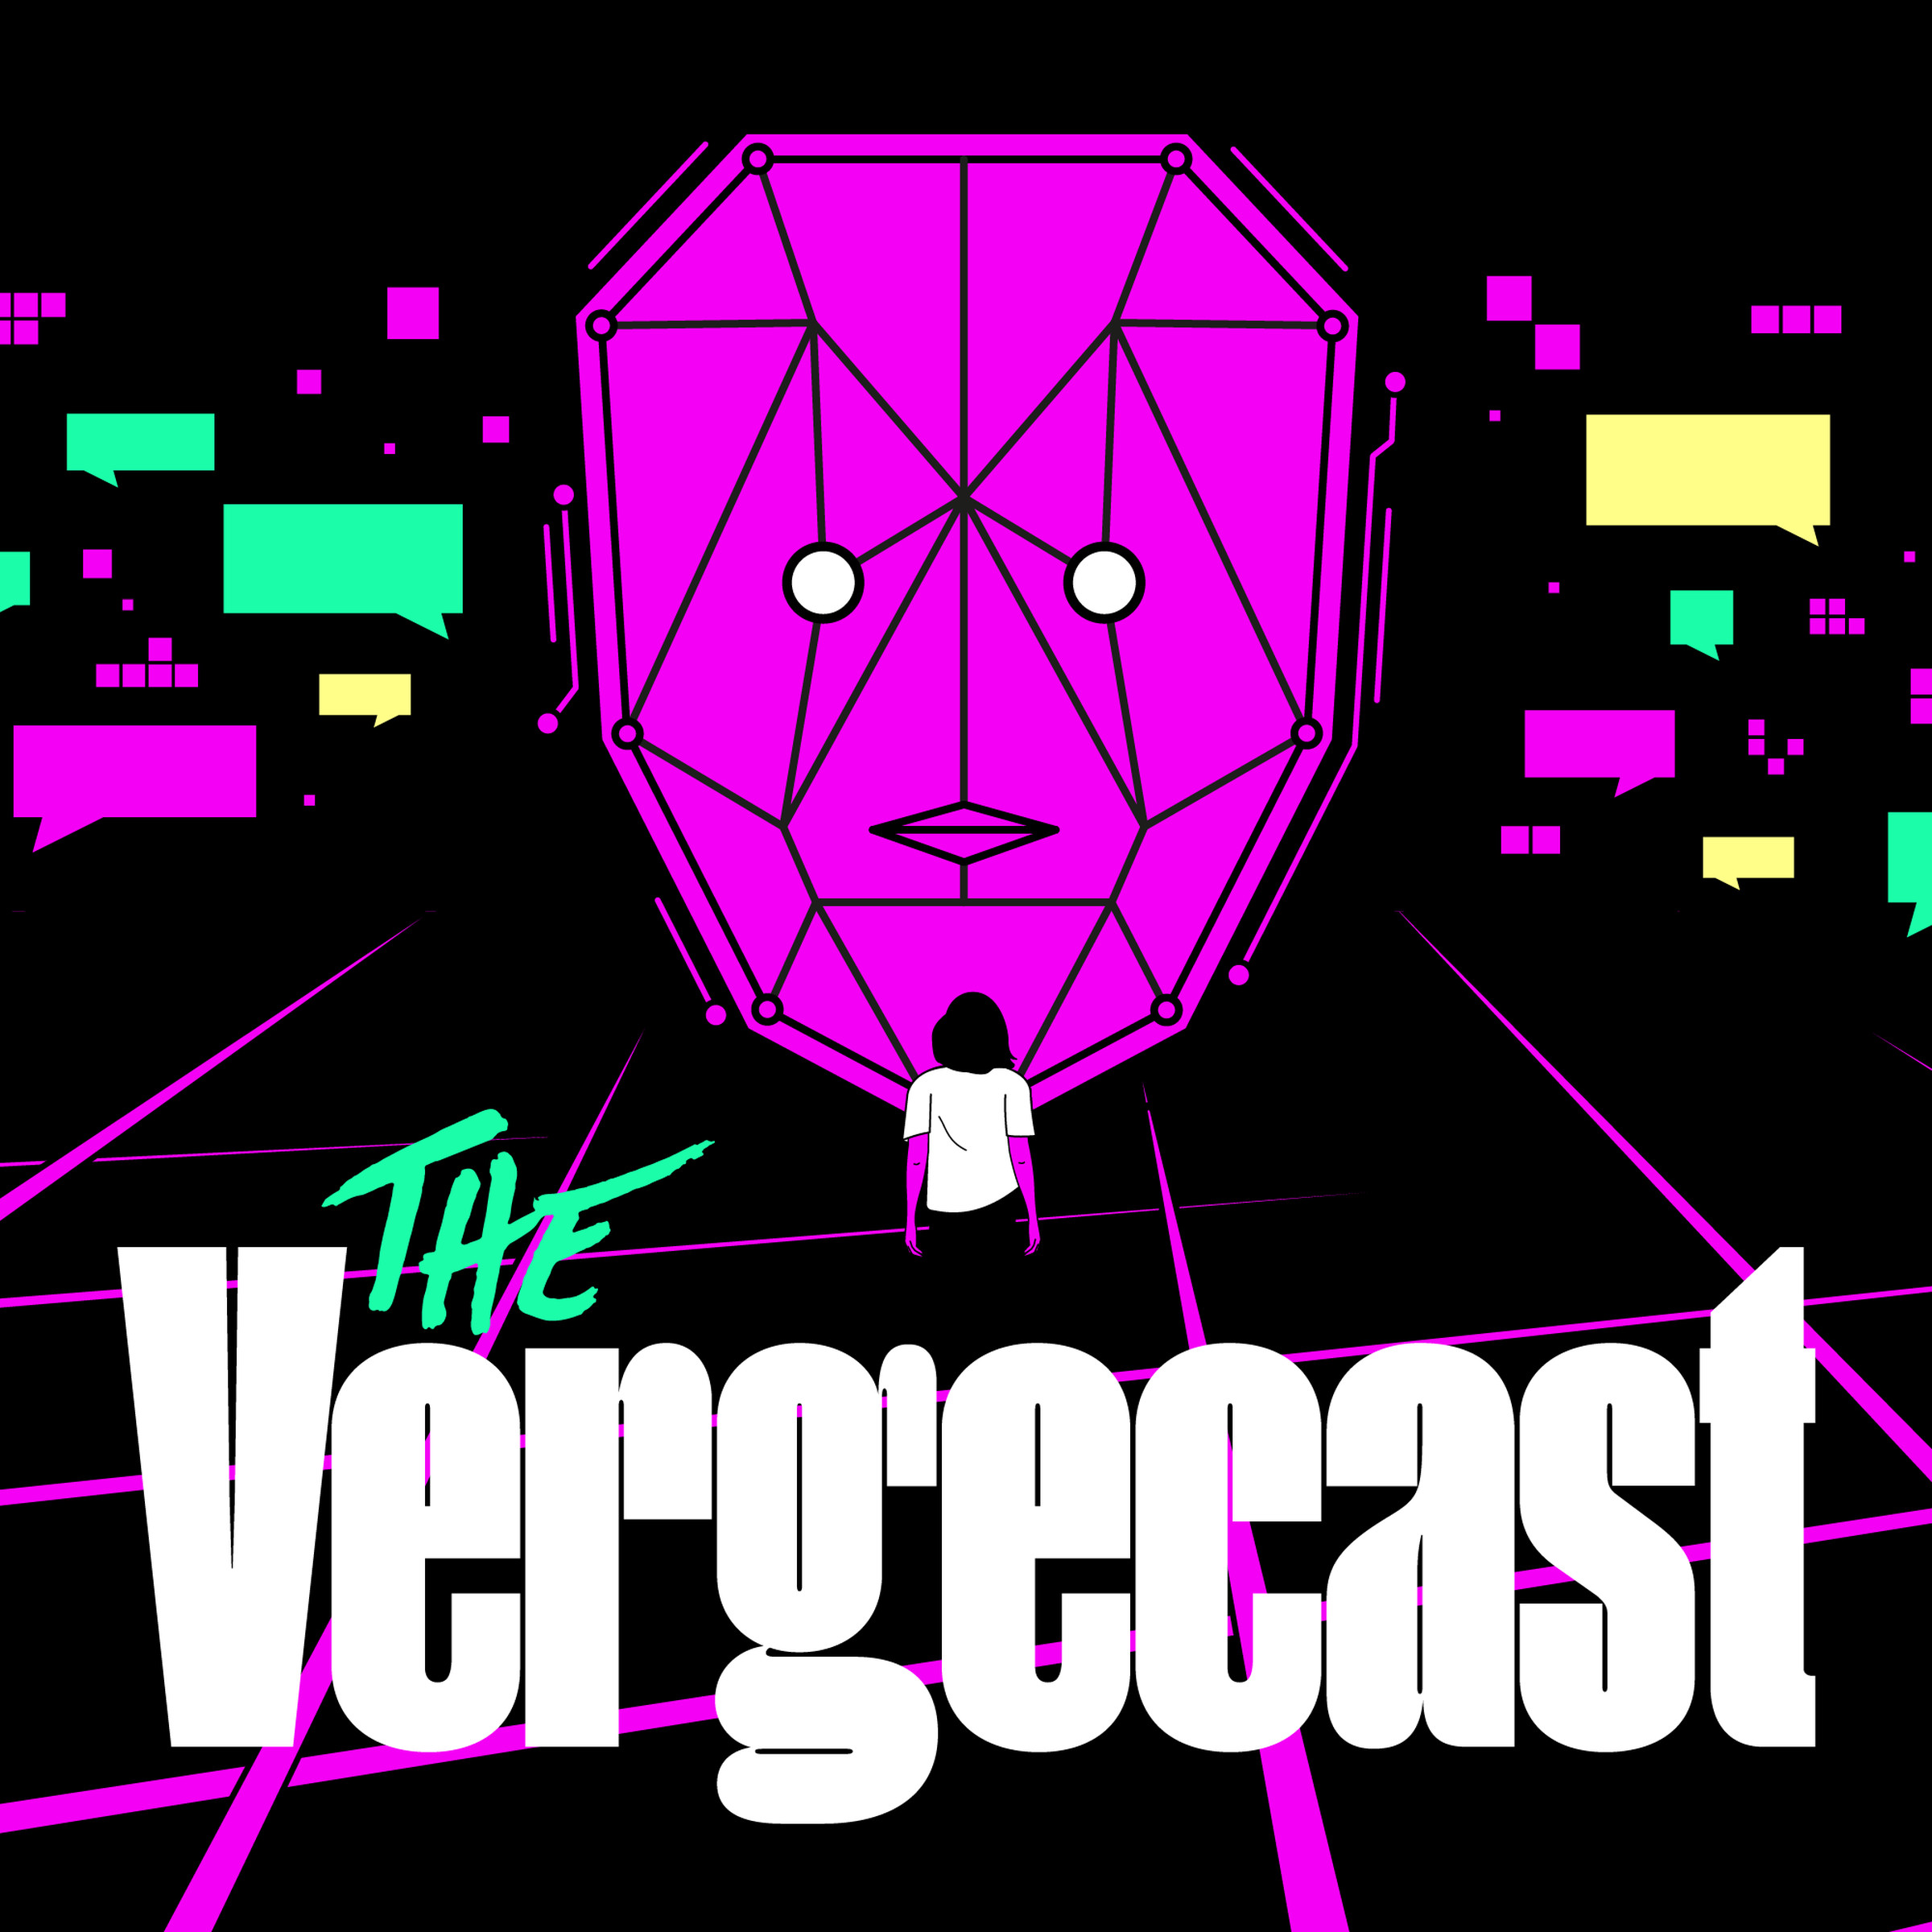 Illustration of the Vergecast logo with an AI face